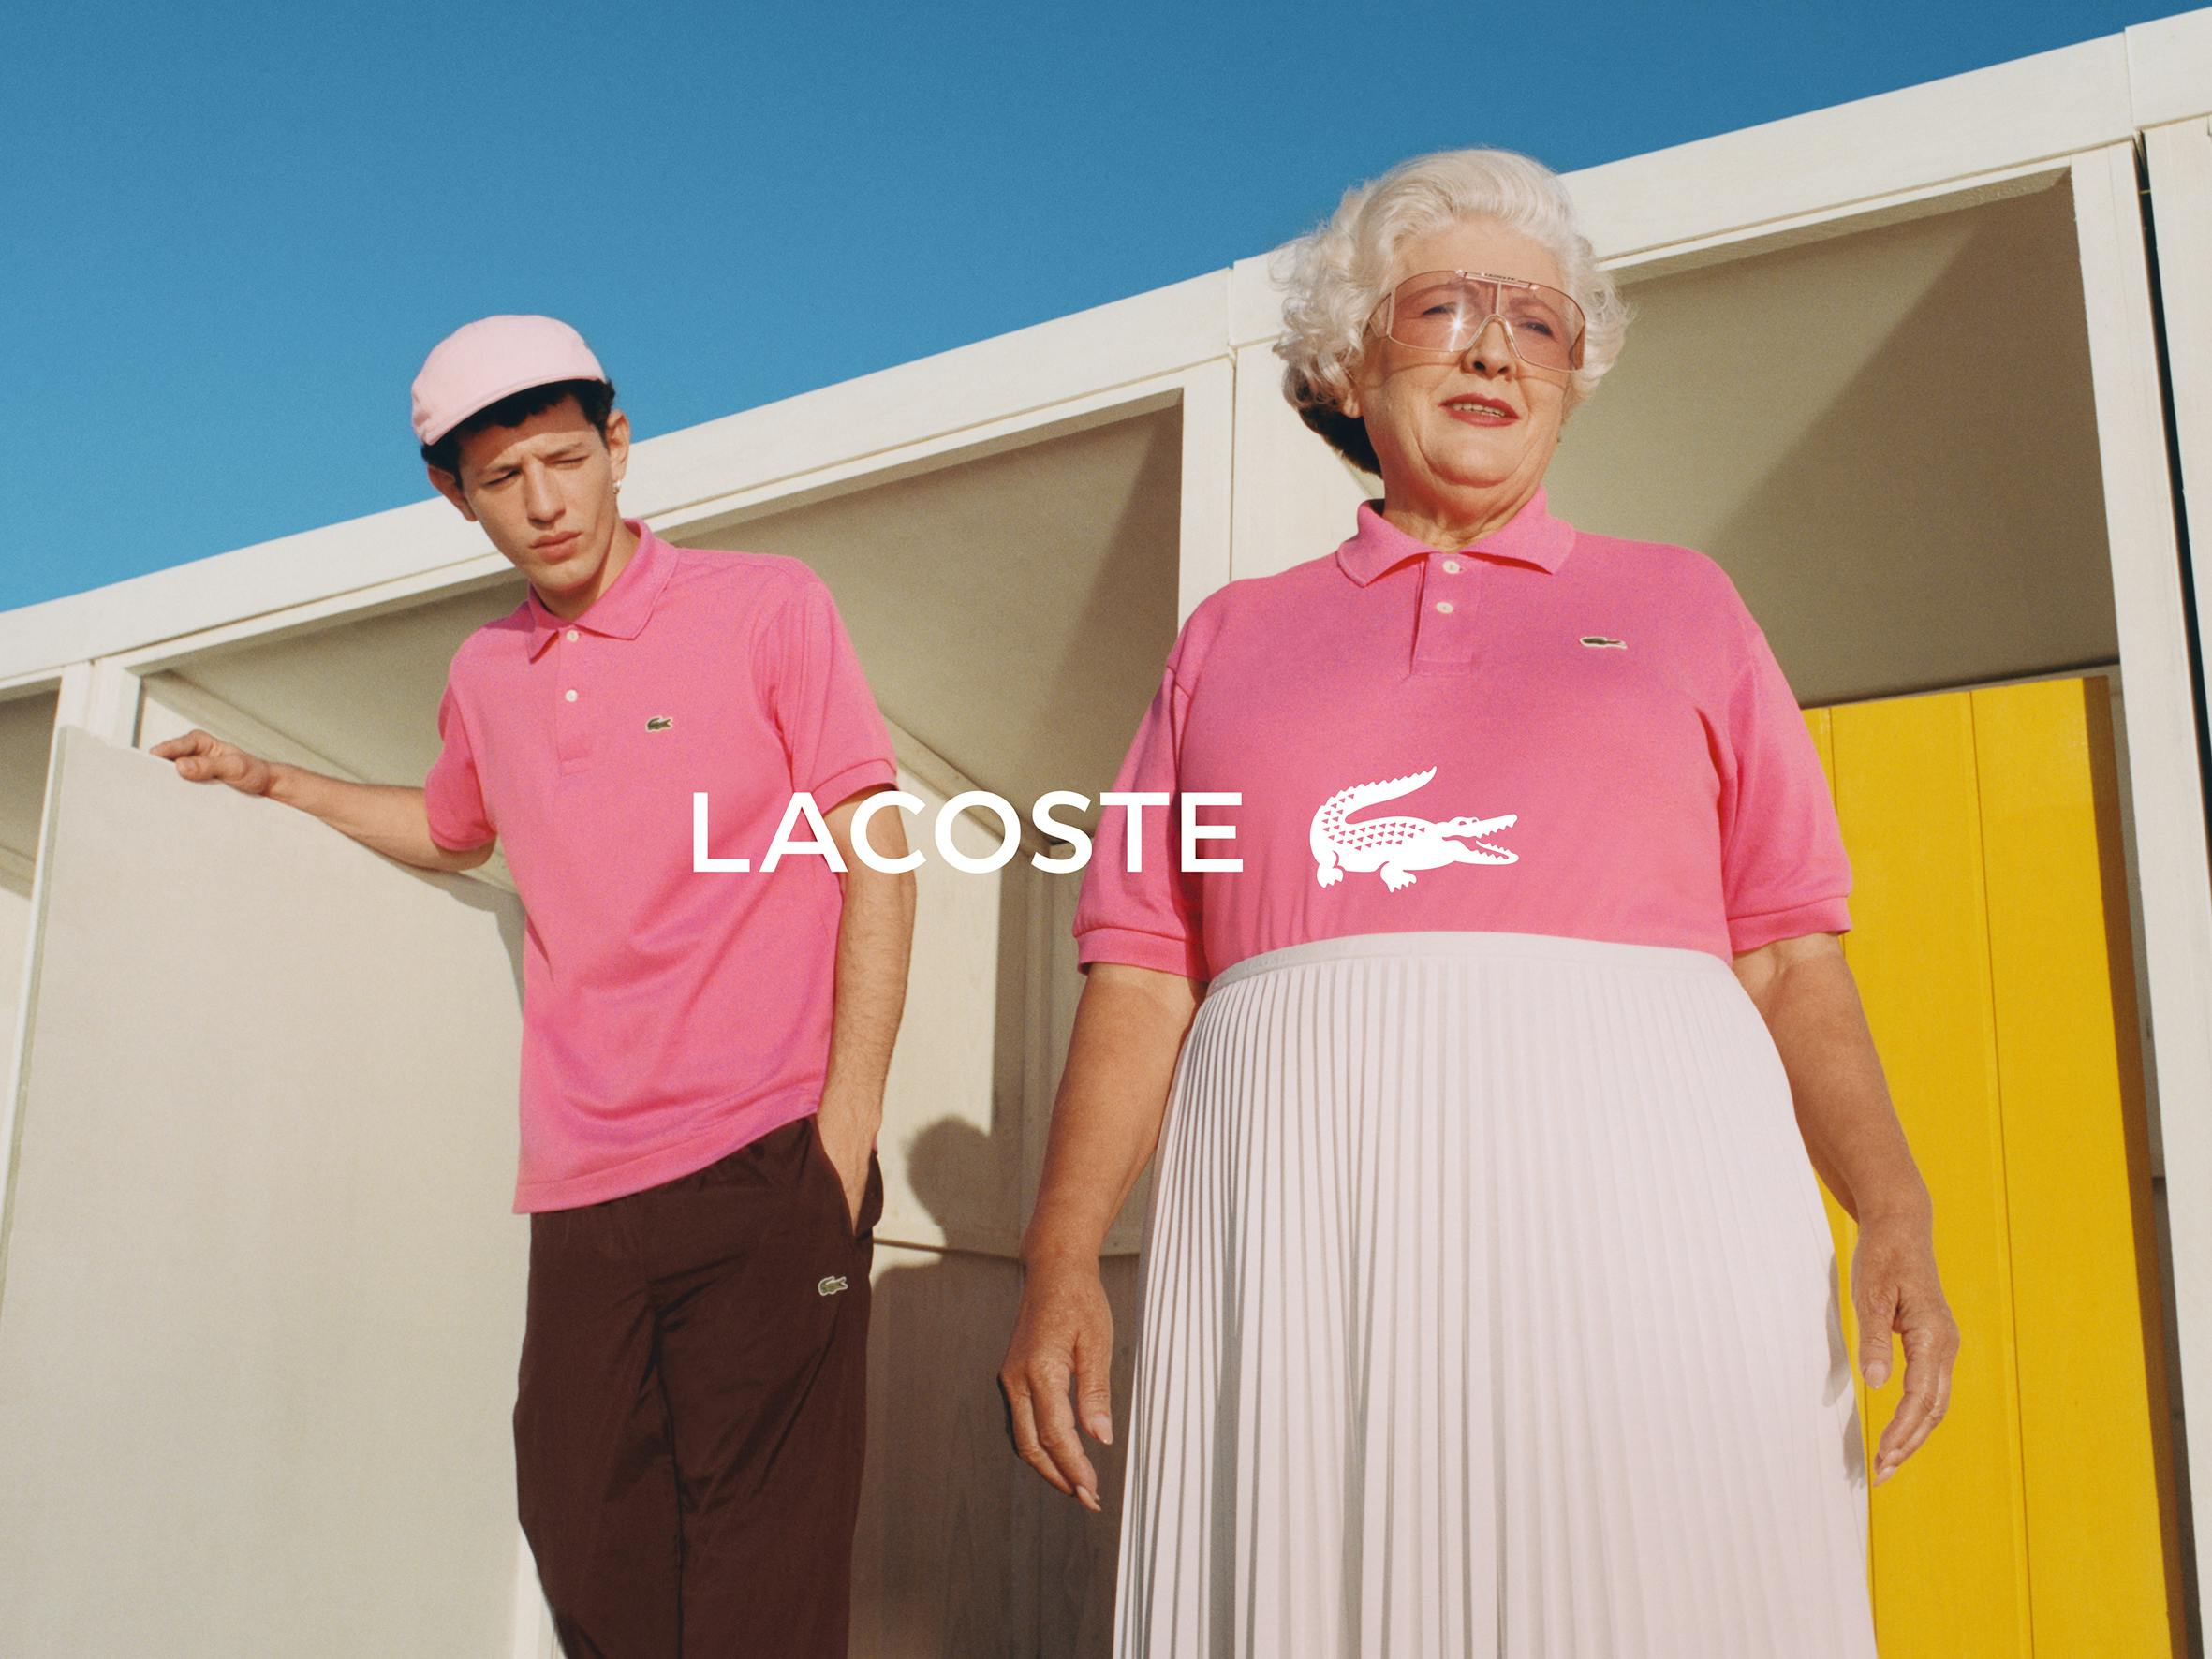 Why are lacoste clothes are so expensive? - Quora